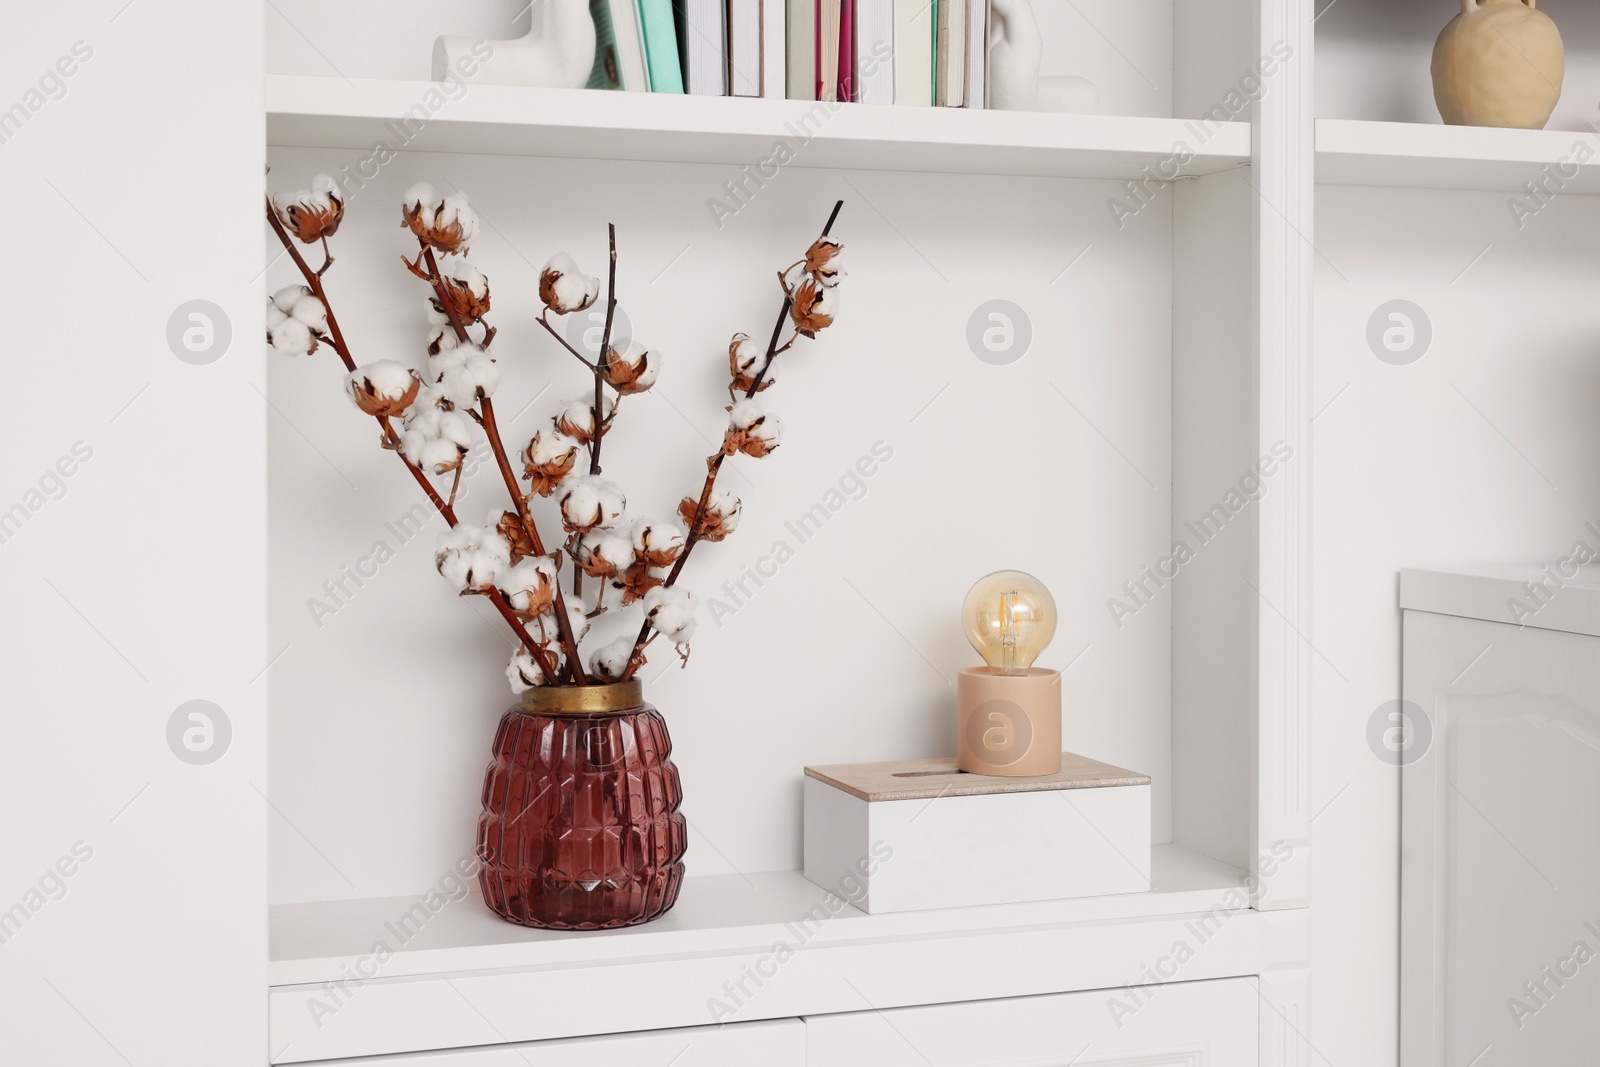 Photo of Shelves with fluffy cotton flowers and different decor indoors. Interior design